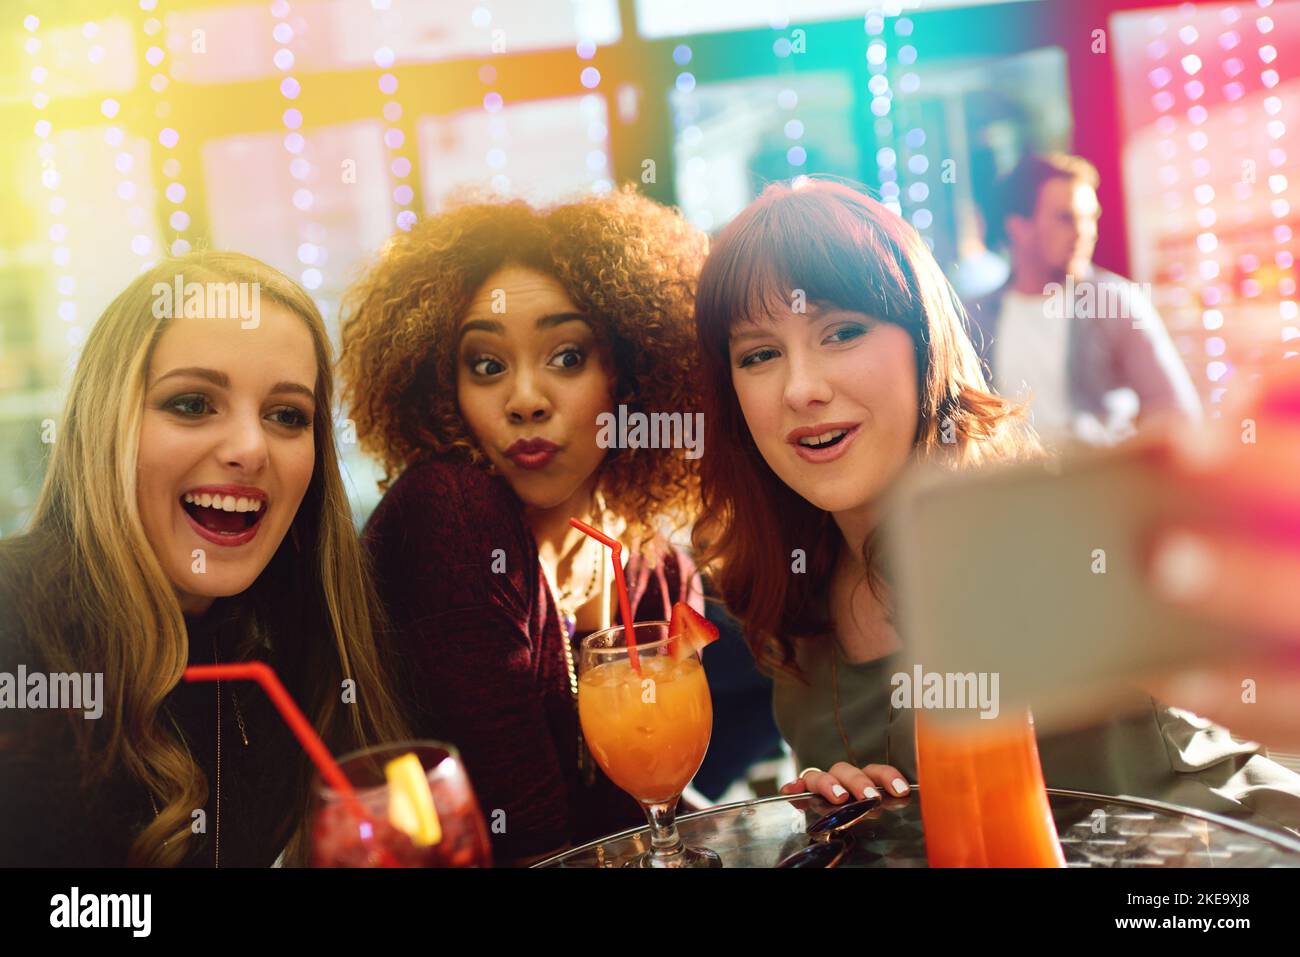 About last night. young friends taking selfies while having drinks at a party. Stock Photo